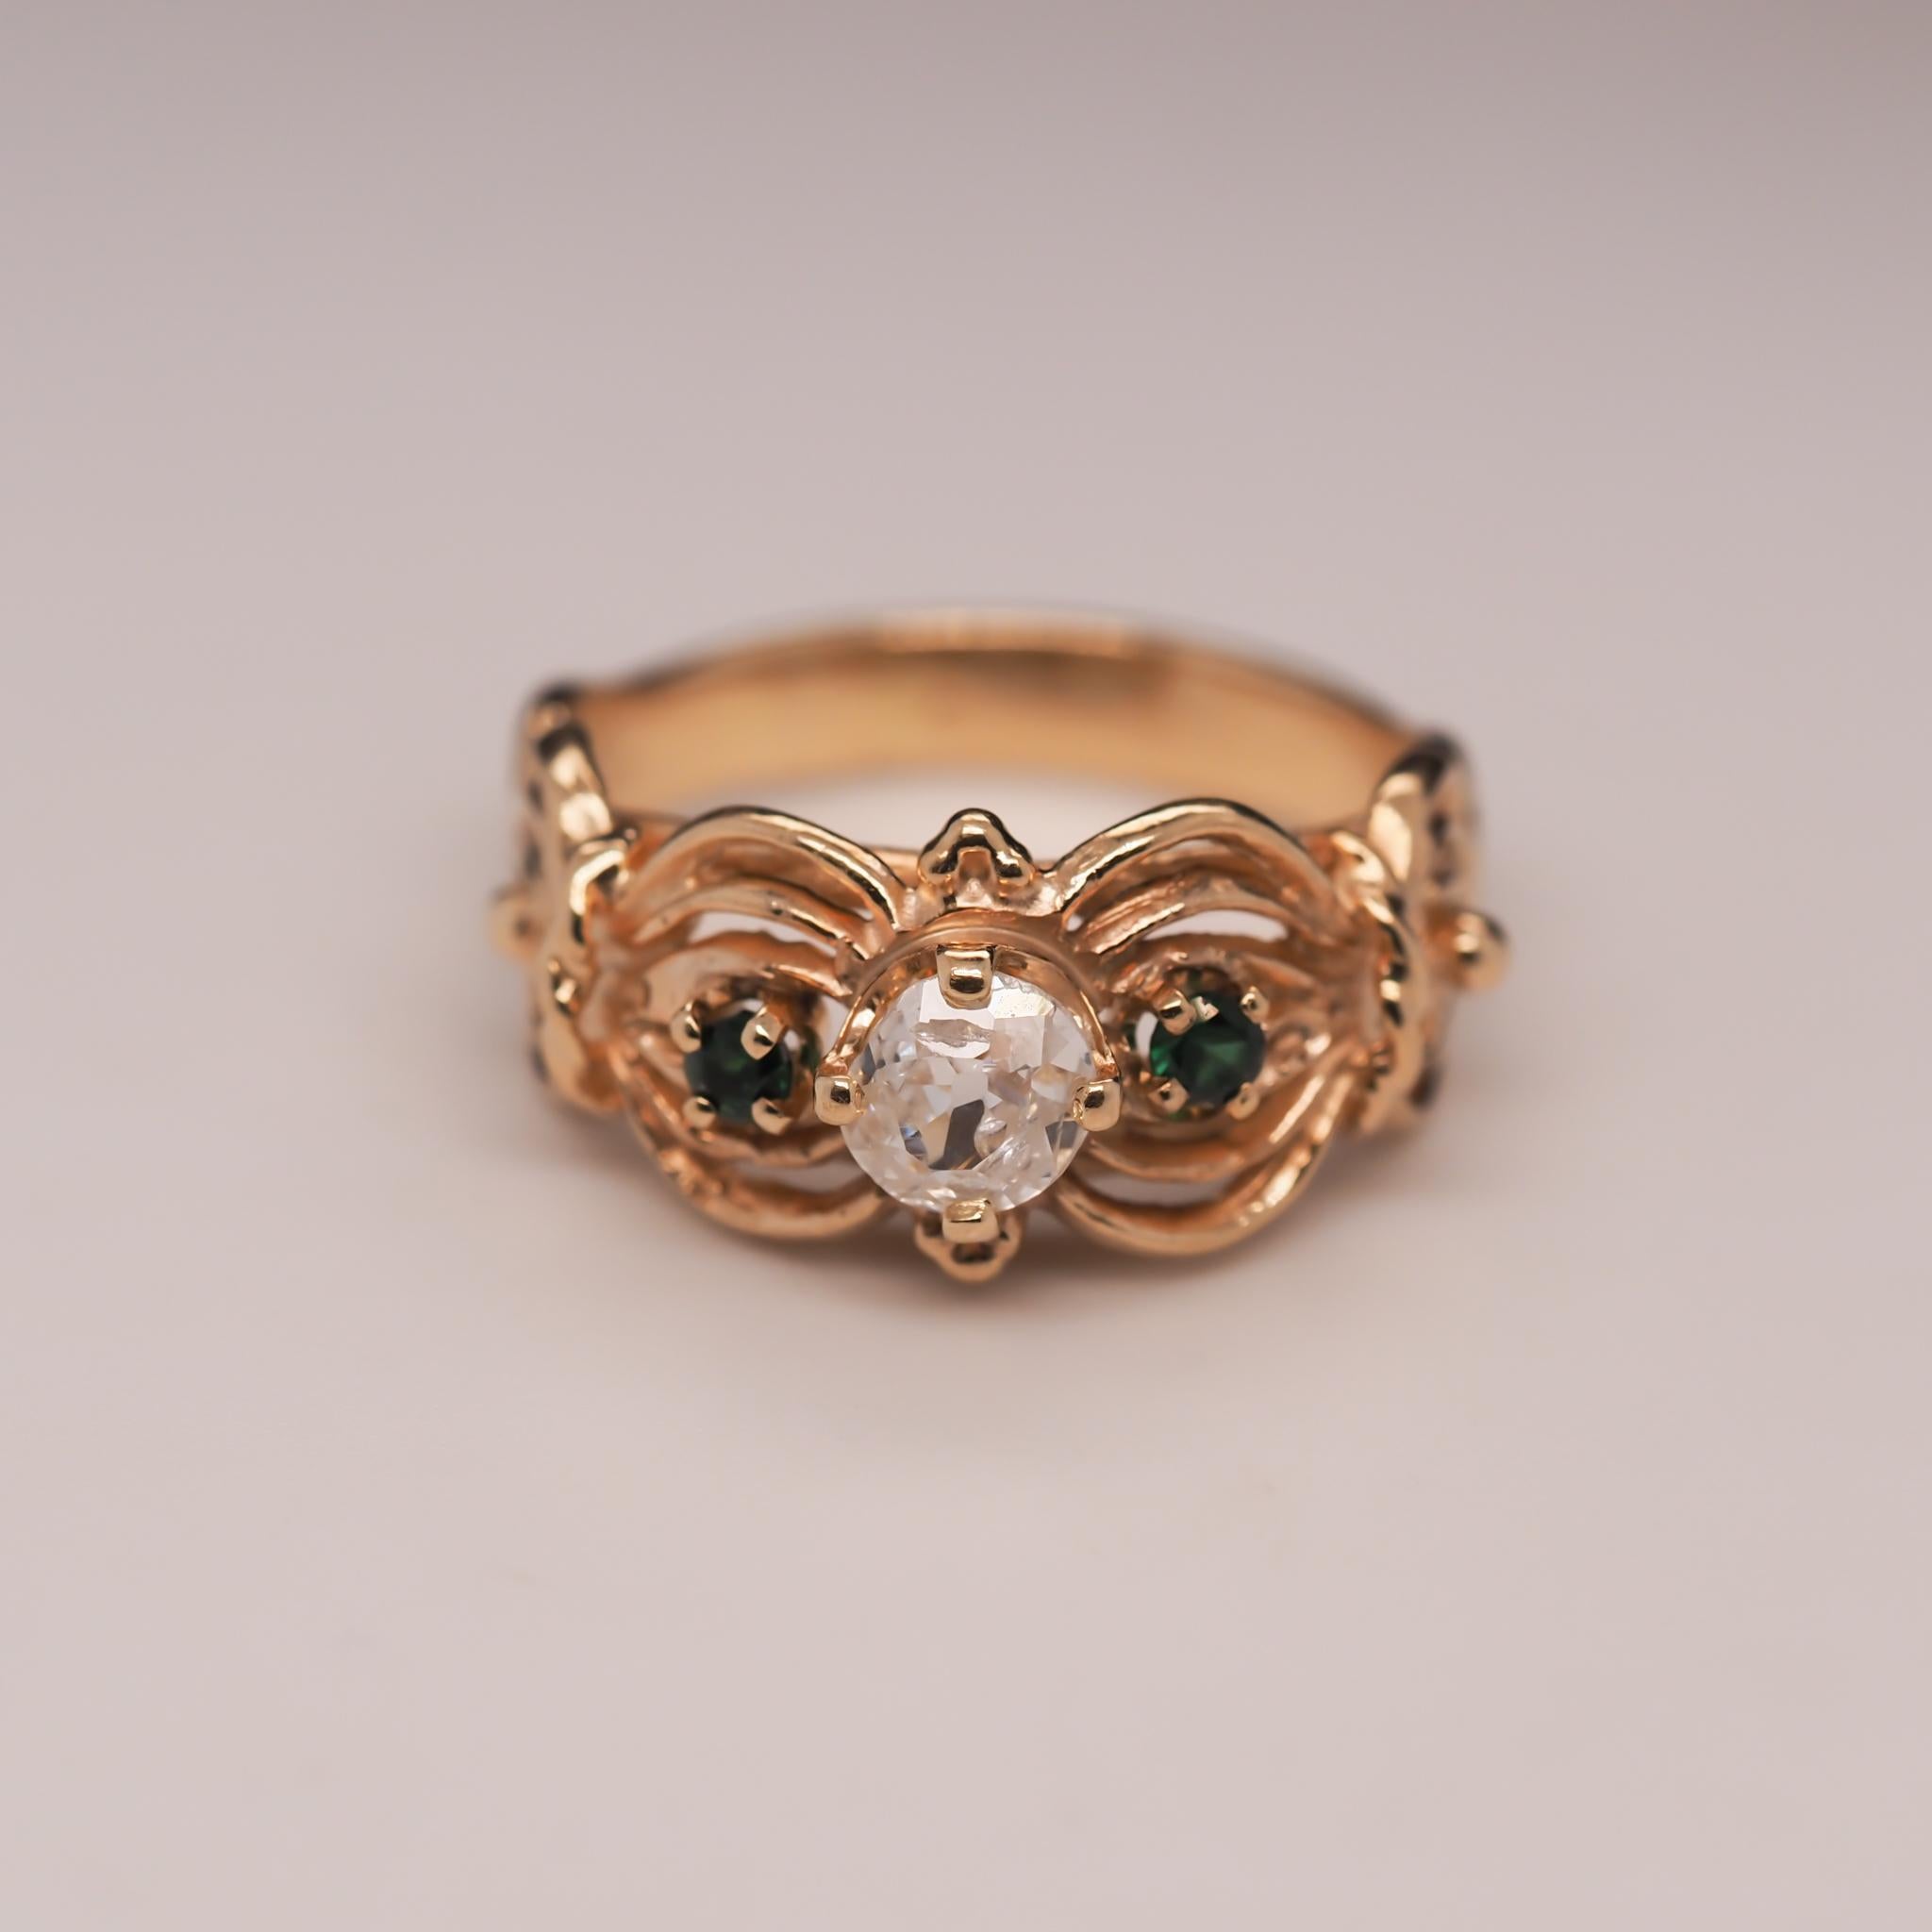 Year: 1960s

Item Details:
Ring Size: 8.75
Metal Type: 14K Yellow Gold [Hallmarked, and Tested]
Weight: 5.7 grams

Diamond Details: .50ct, Natural Diamond, Old Miner brilliant, F color, SI Clarity

Side Stone Details: Emeralds, Natural, Round,